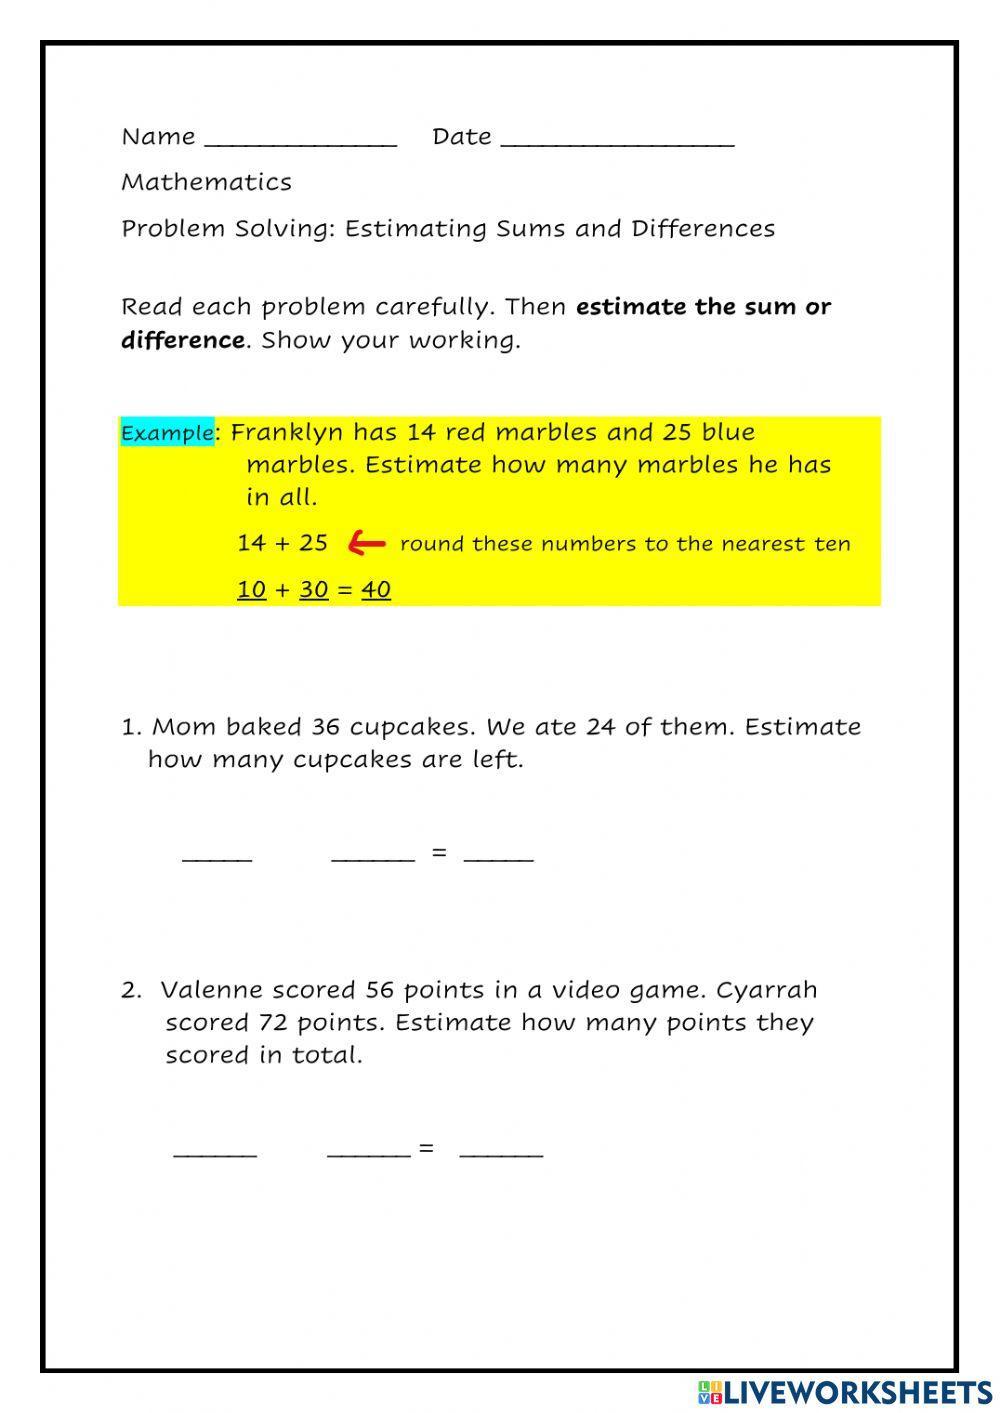 Estimating Sums and Differences Word Problems